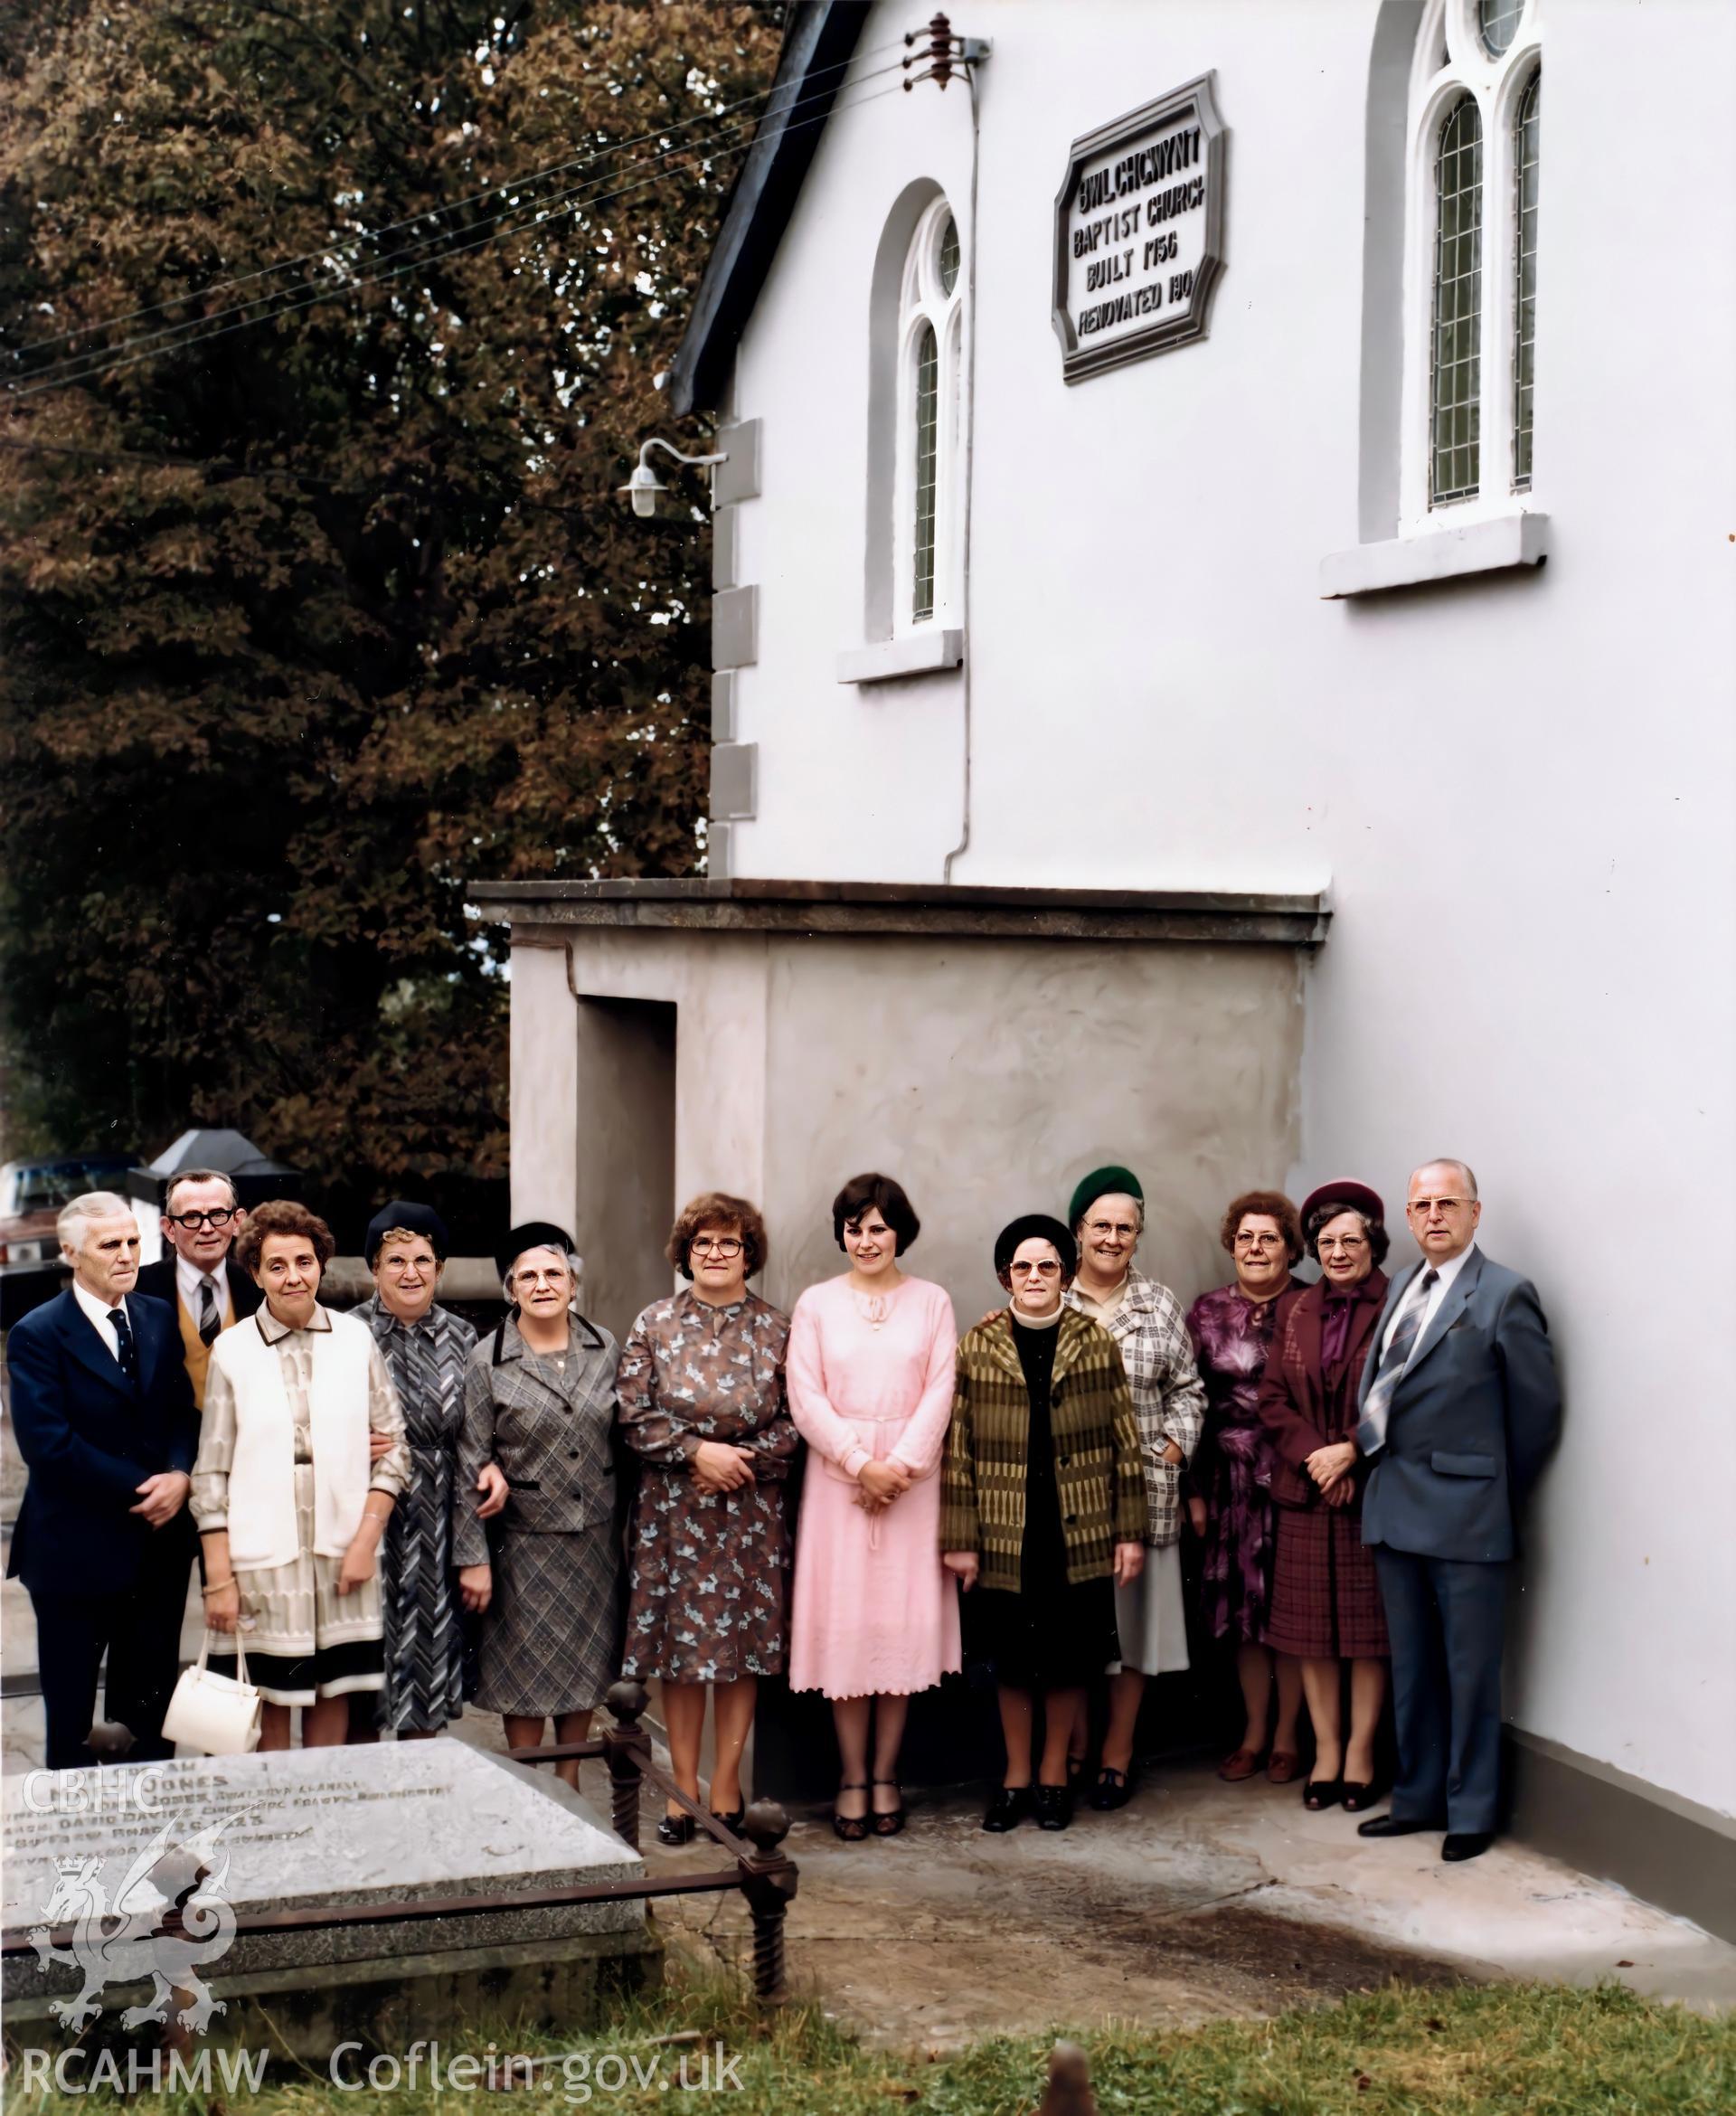 Bwlchgwynt chapel congregation in the 1970’s. Colour photograph by Cliff James.